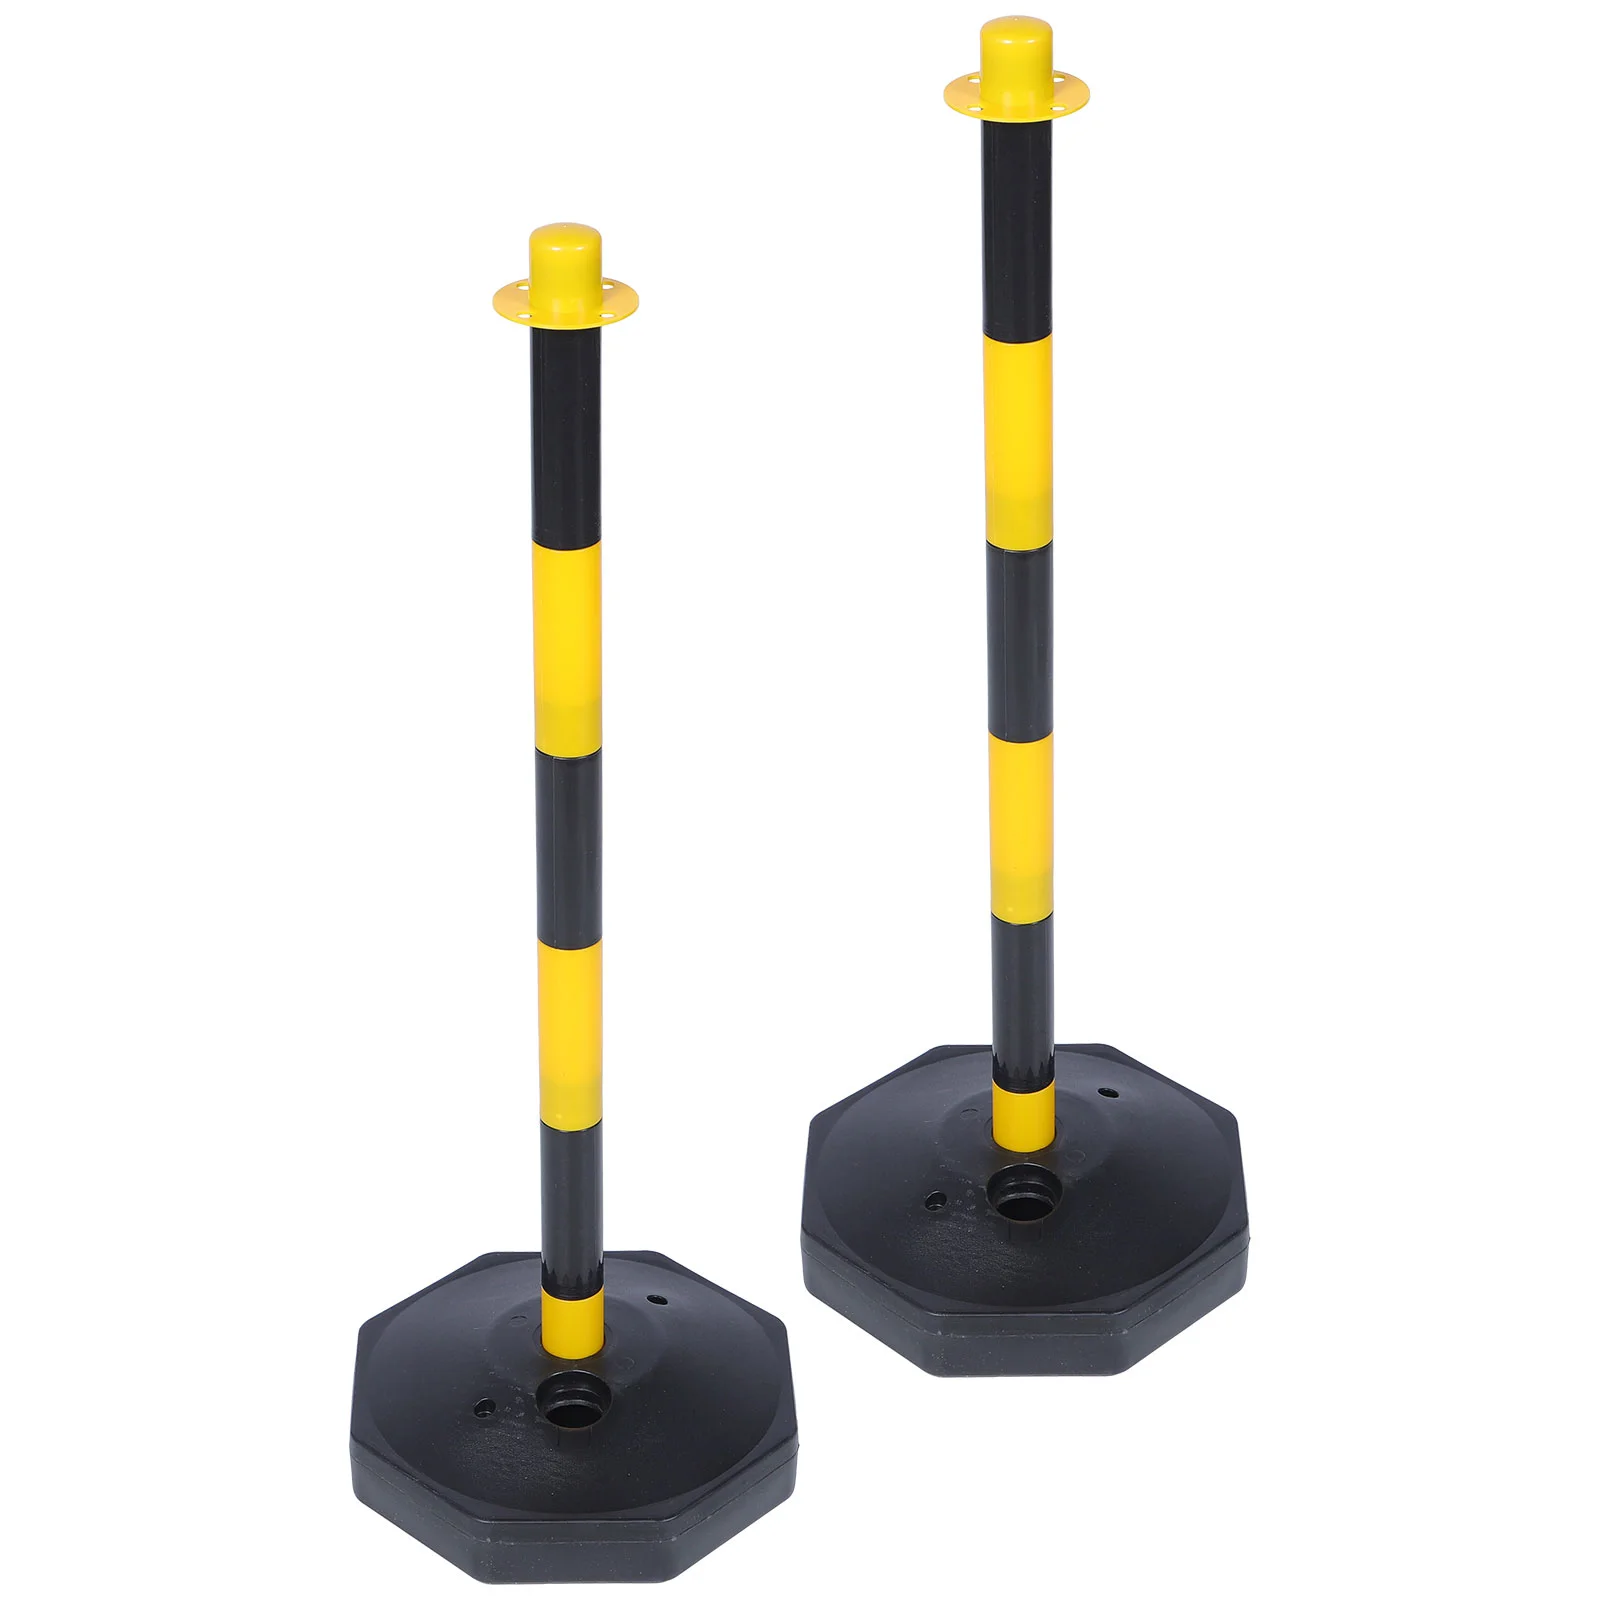 

2pcs Warning Column Safety Cones Traffic Cones Delineator Post Cone Parking Barriers